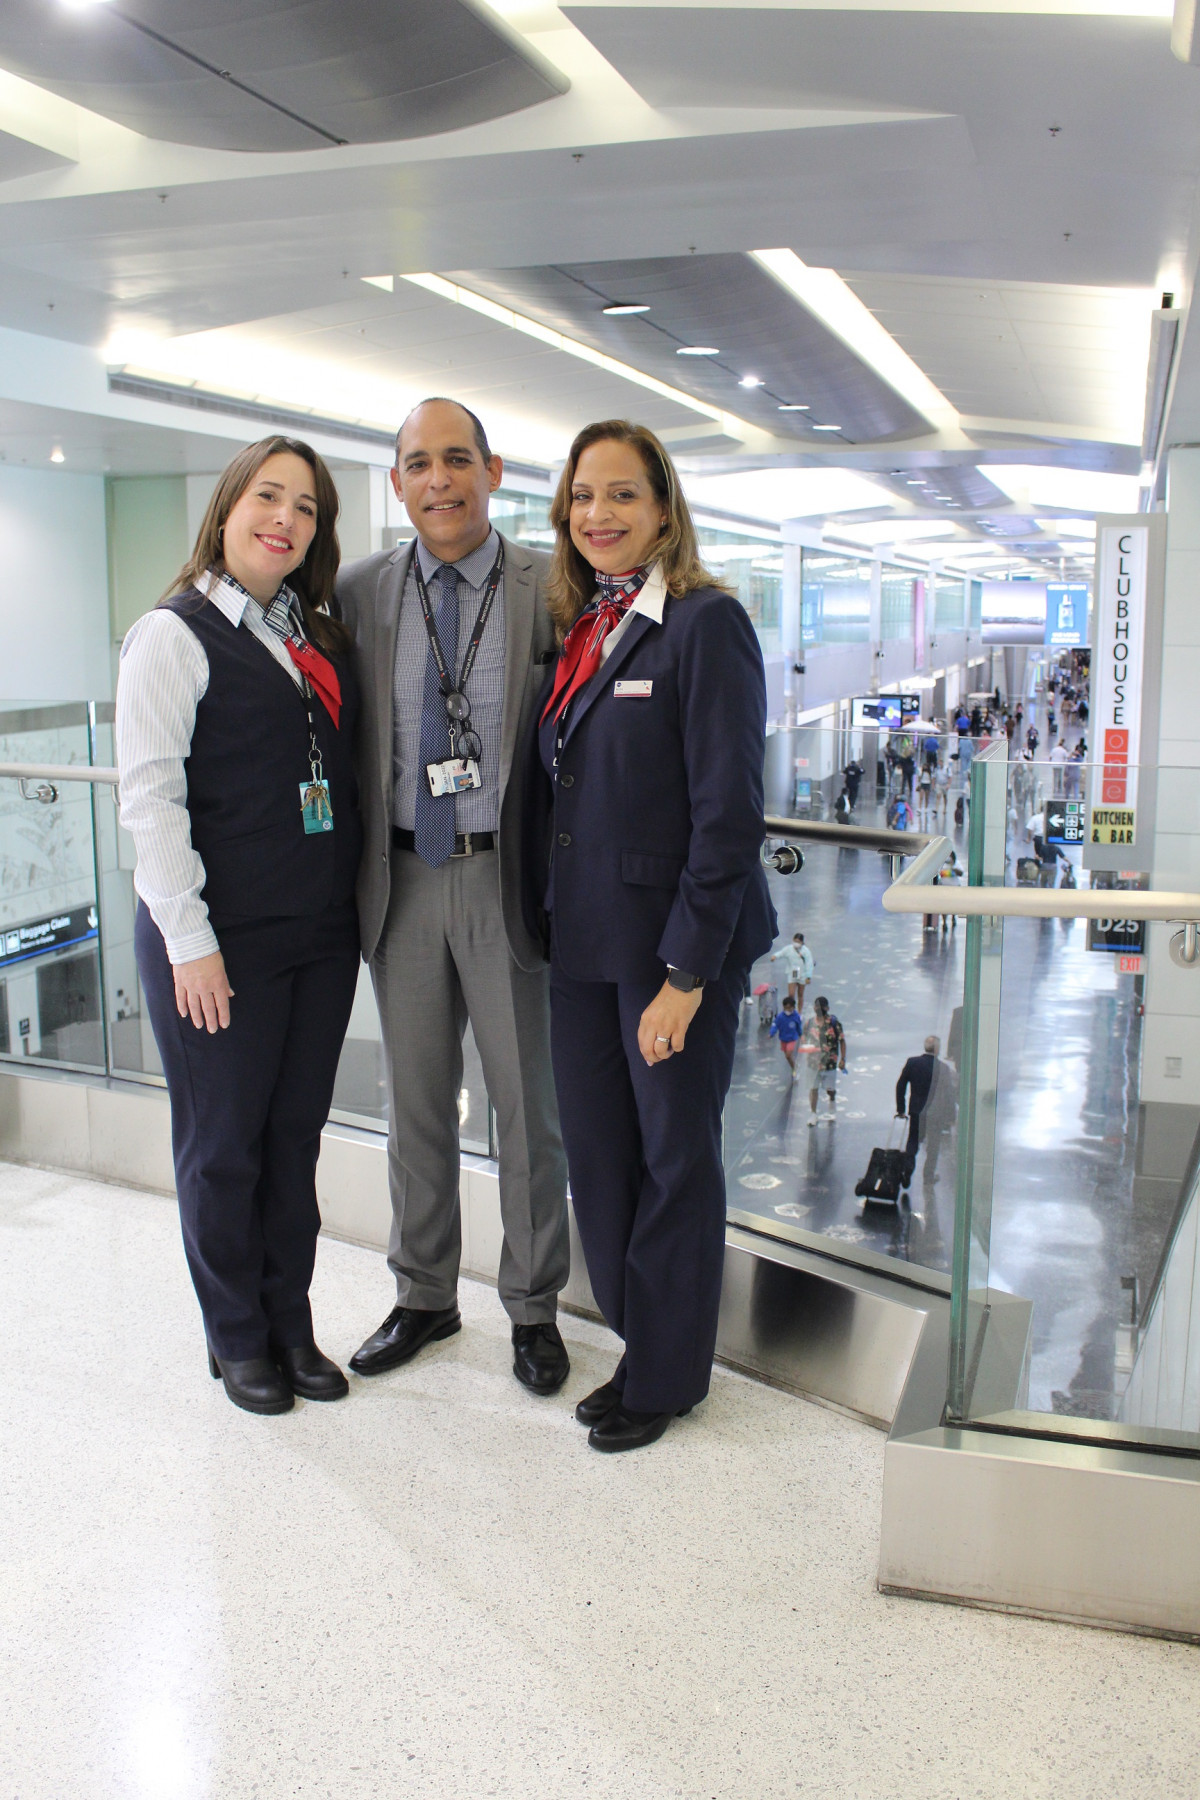 Elizabeth, Ed and Hilda together at the airline's Miami hub 2